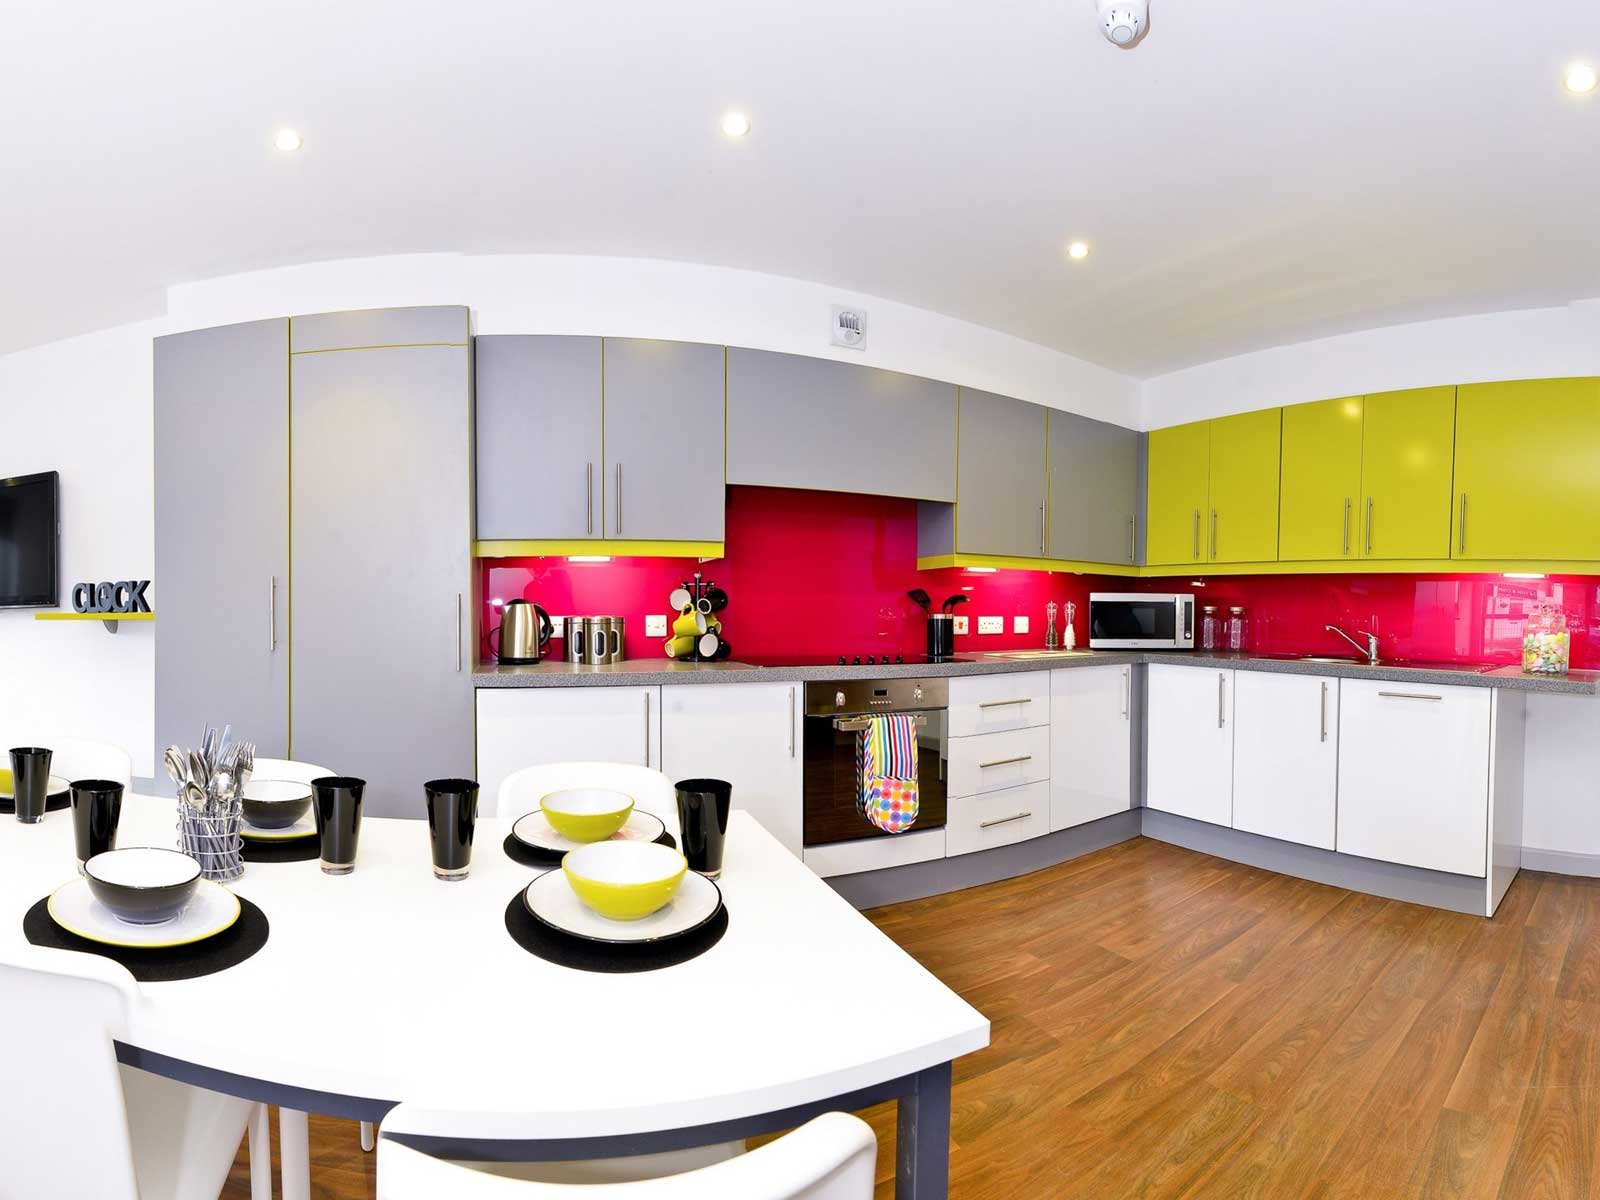 Kitchen at the boulevard, with range of wall cupboards, oven, microwave, fridge freezer and large table.